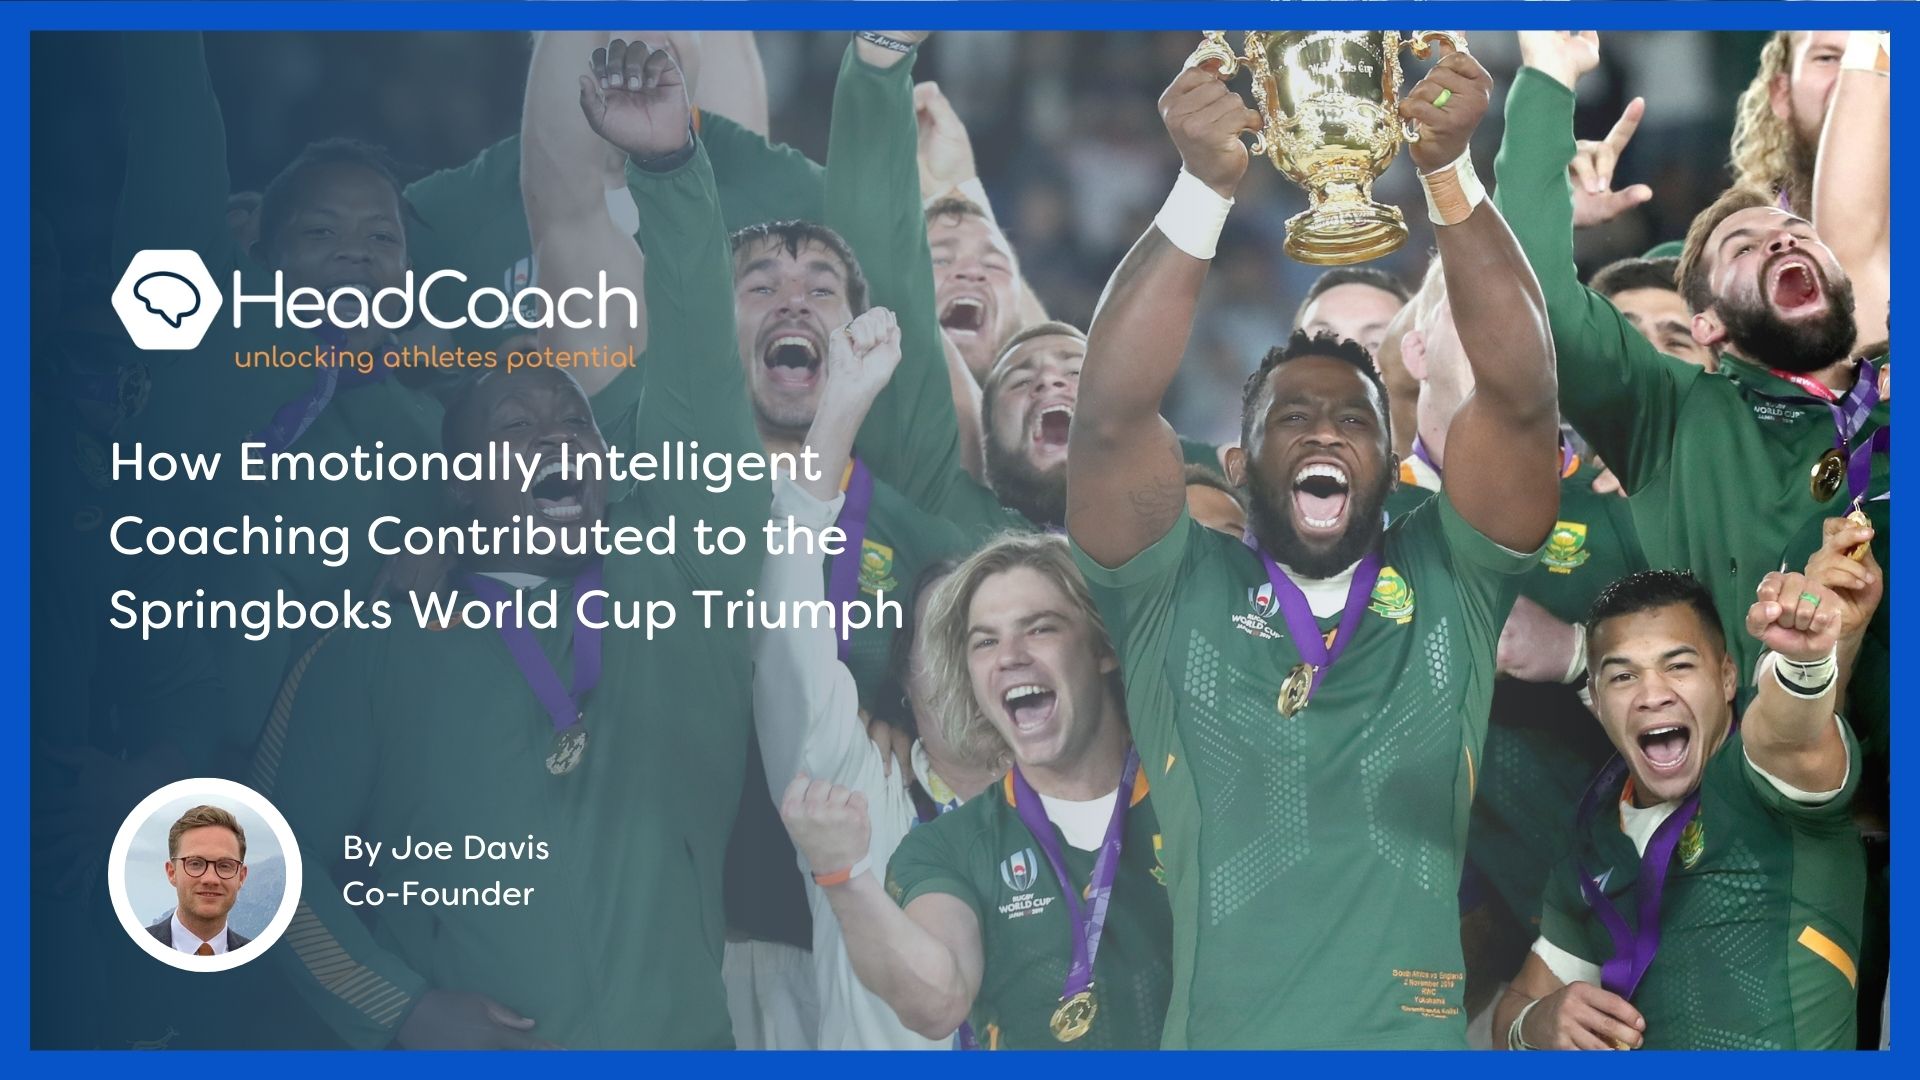 How Emotionally Intelligent Coaching Contributed to the Springboks World Cup Triumph